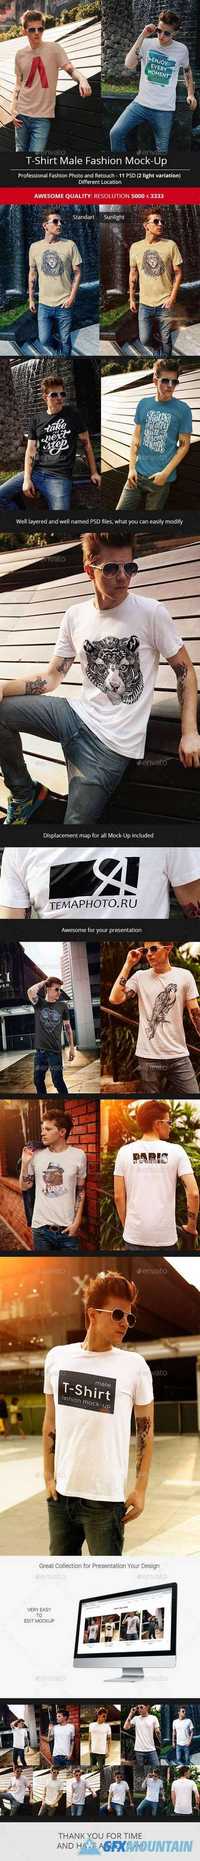 GraphicRiver - Male T-Shirt Fashion Mock-Up - 16659898